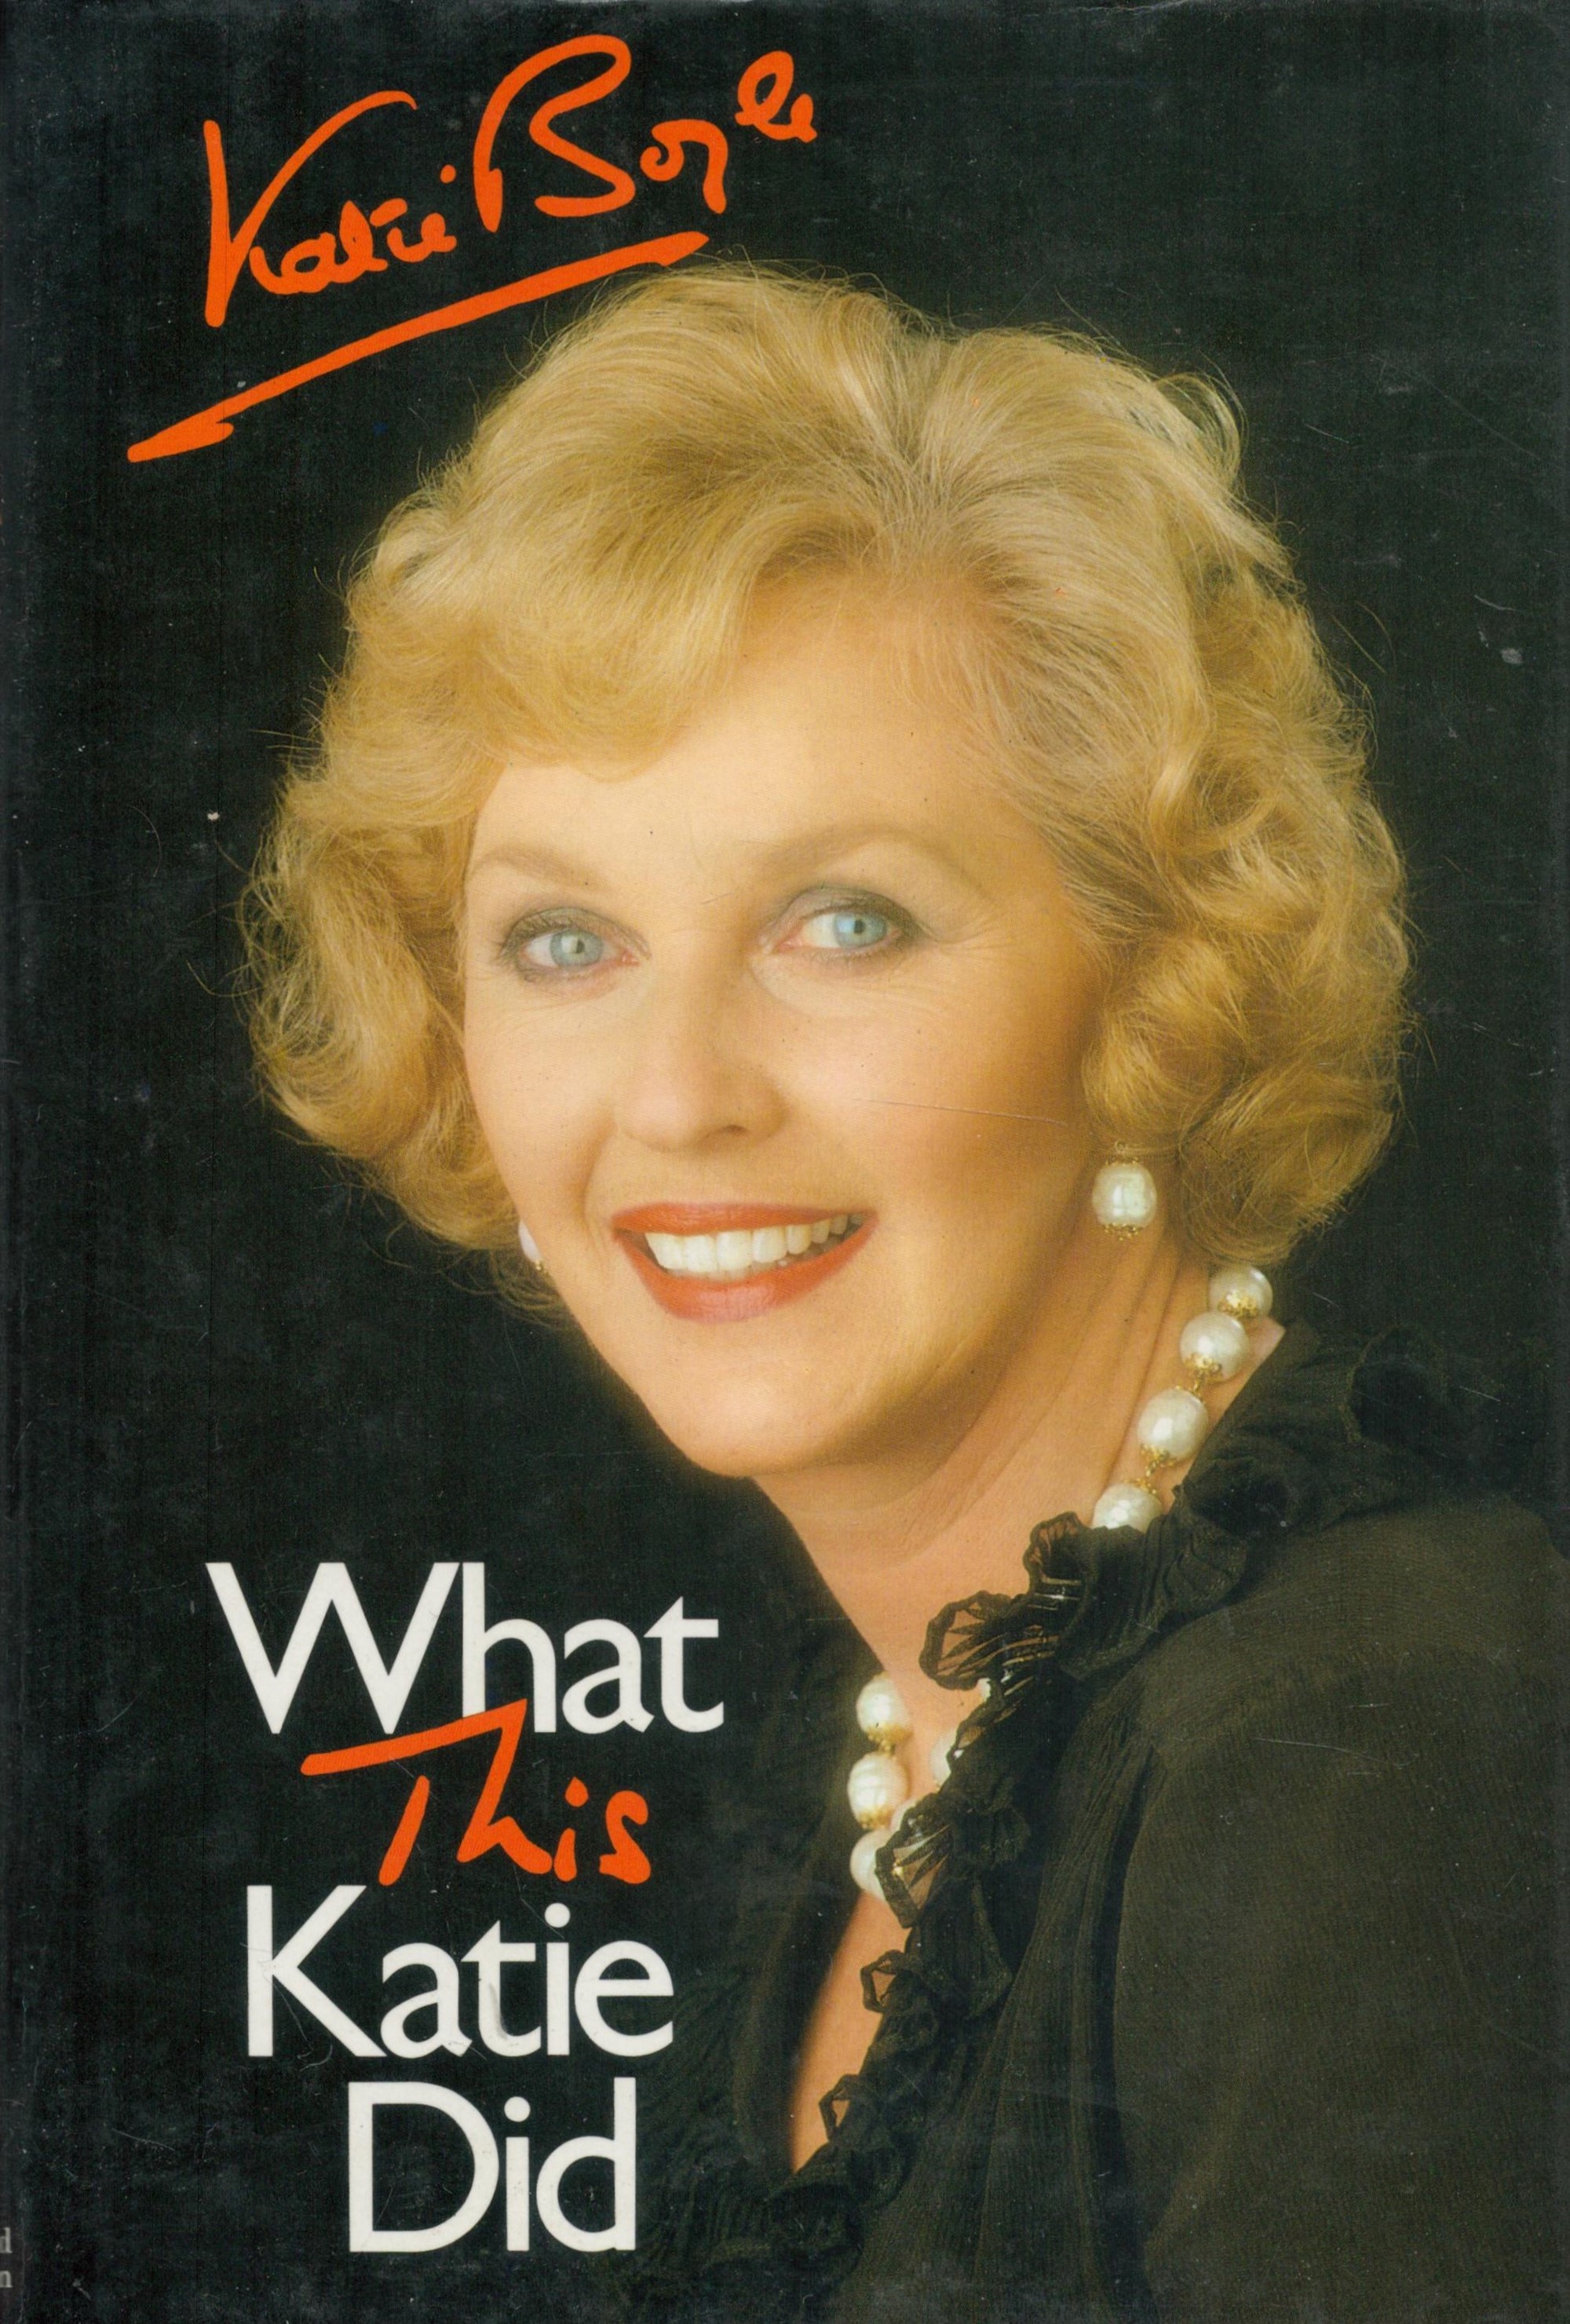 Katie Boyle signed book What This Katie Did. Hardback Book in Good Condition. All autographs come